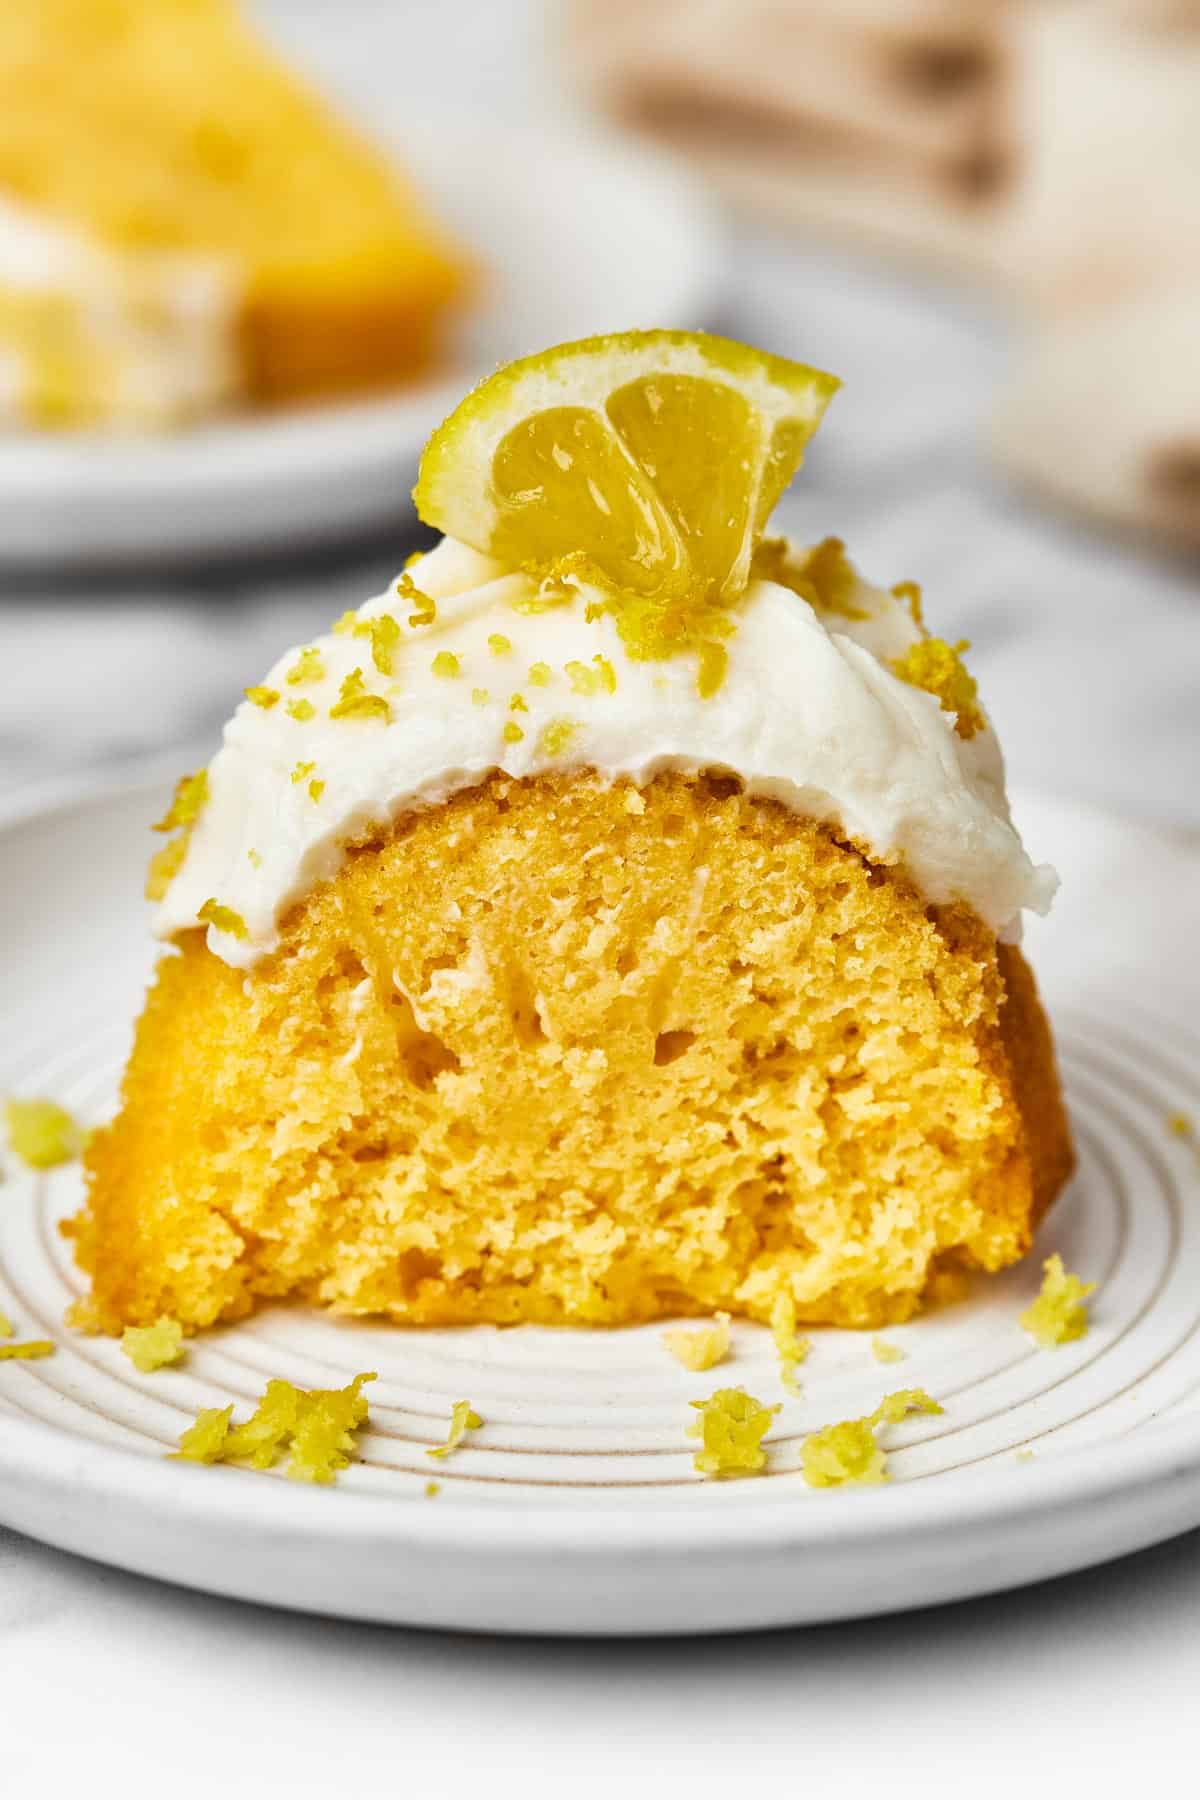 A slice of frosted cake, garnished with lemon zest and a small lemon wedge.